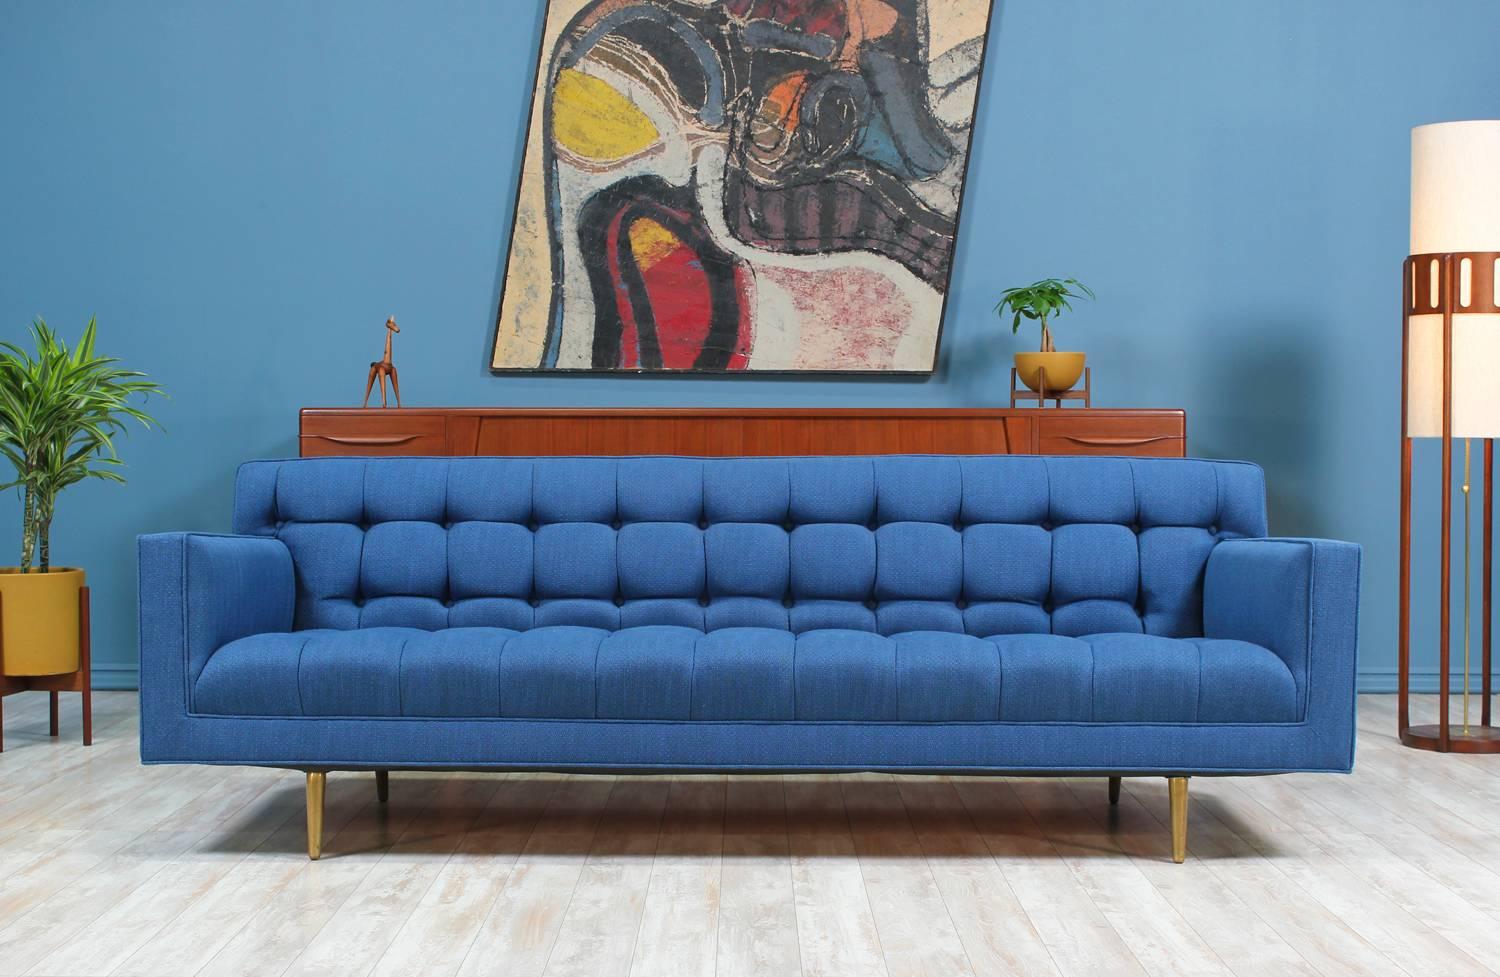 Mid Century Modern sofa designed by Edward J. Wormley for Dunbar in the United States circa 1950’s. This sofa features a beautiful biscuit tufted detail on the blueberry tweed fabric upholstery which is complimented with the elegant solid brass